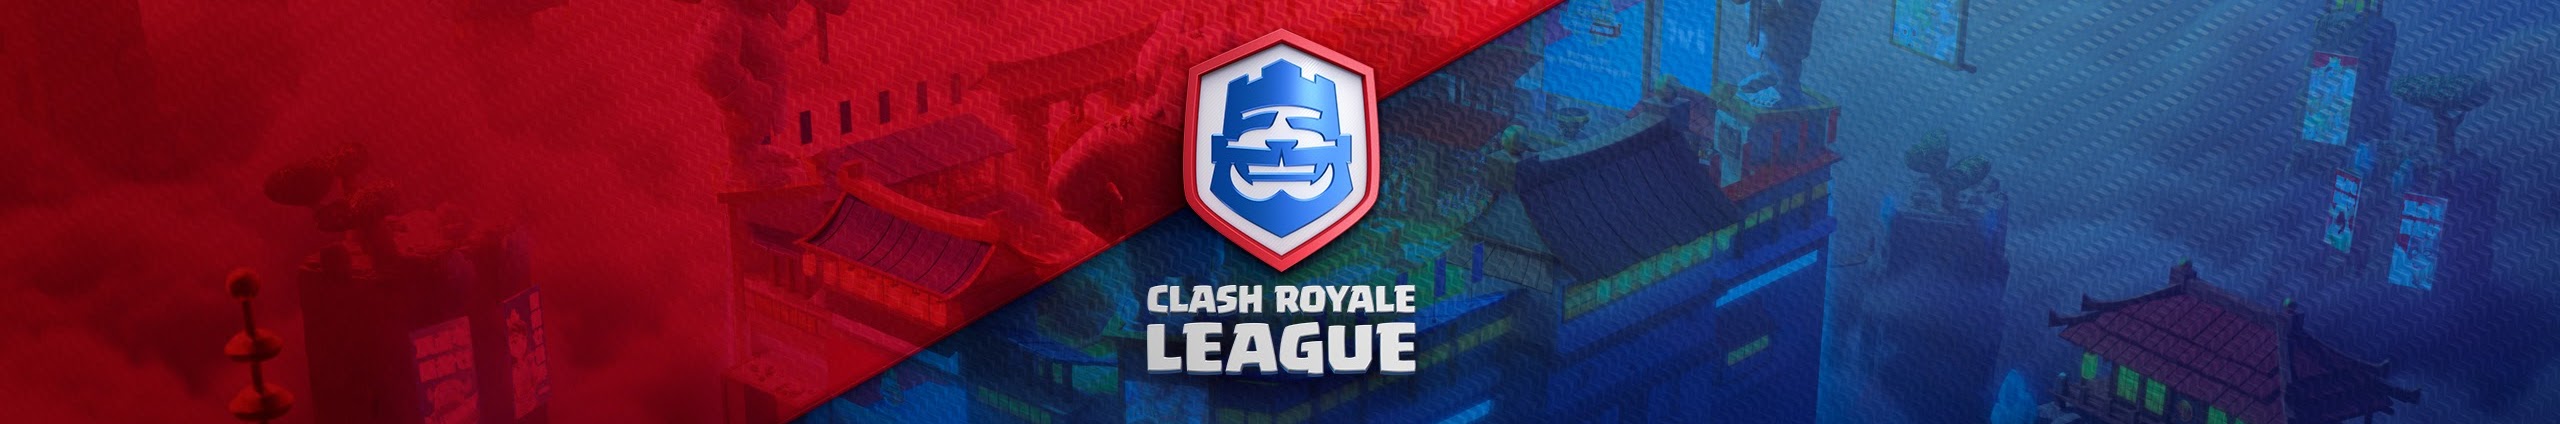 Crl West 2019 ウェストのチームと選手 Teams Players クラロワ 攻略メモ 観戦ガイド Wiki